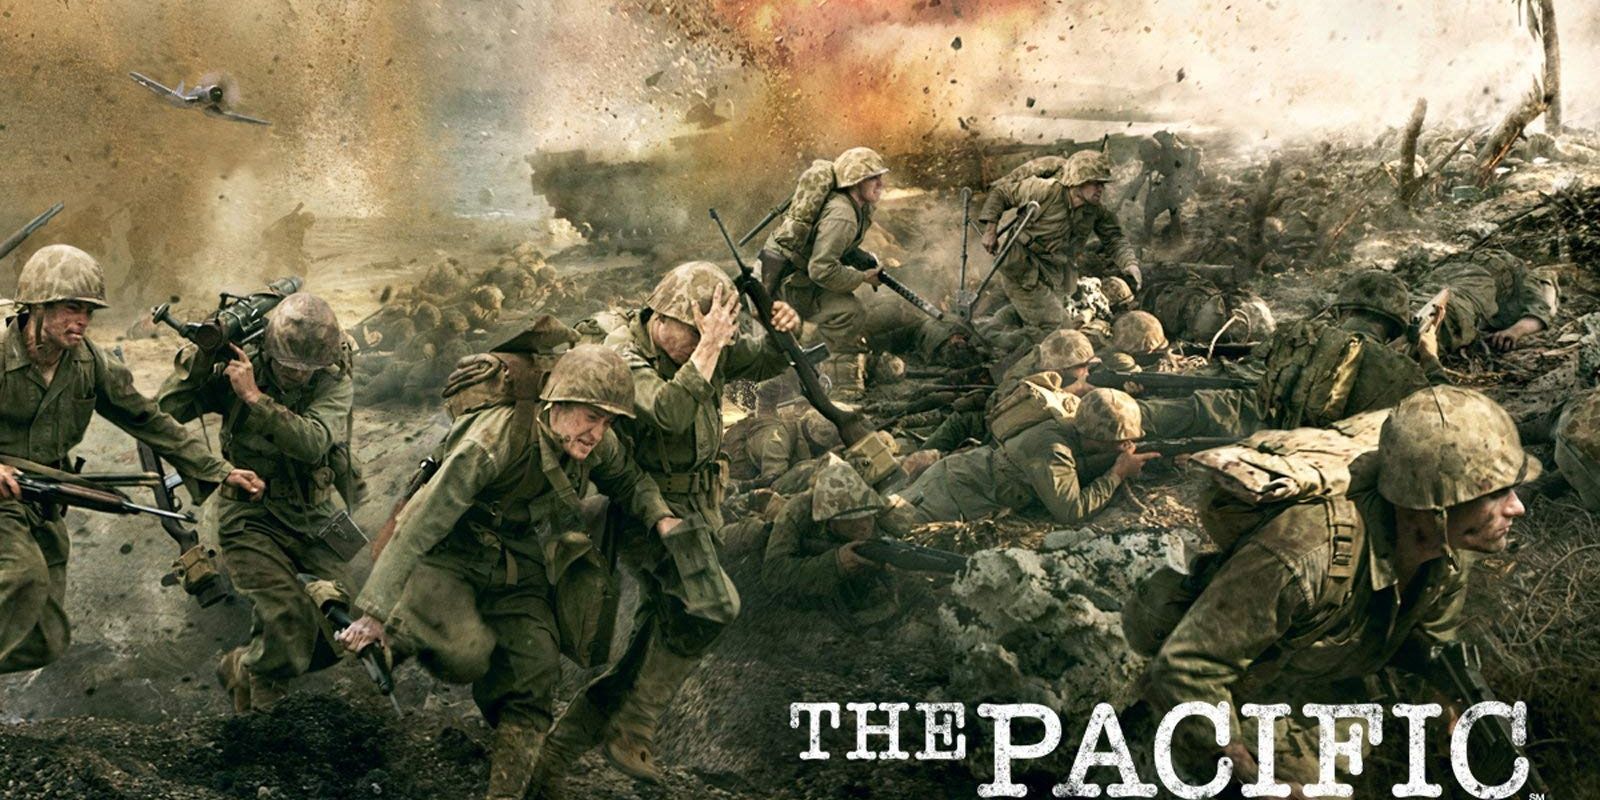 The poster for HBO series The Pacific showing lots of men on the battlefield shooting and dying